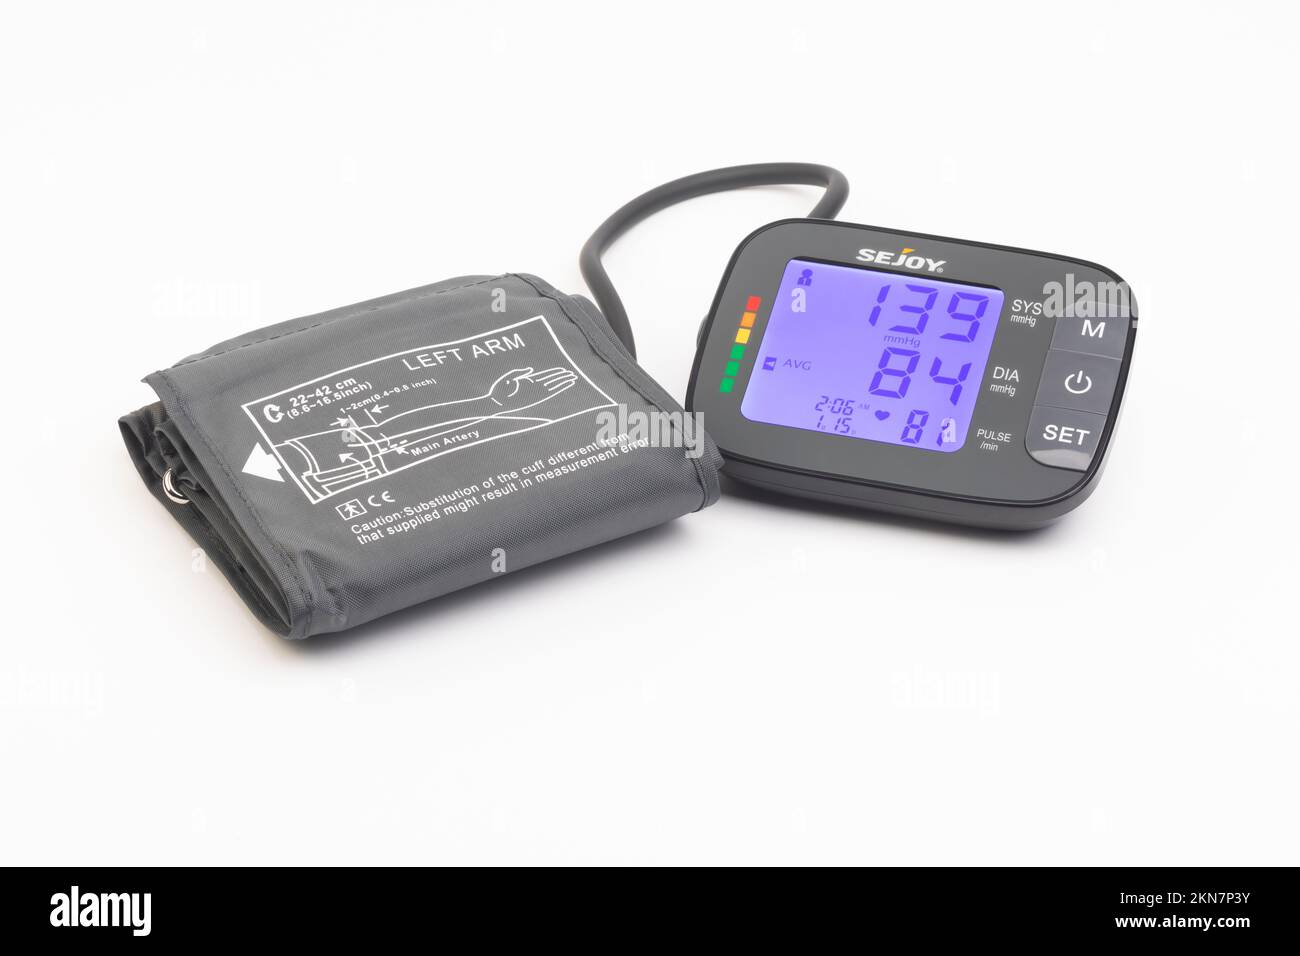 A Joytech Healthcare Sejoy blood pressure monitor and arm cuff Stock Photo